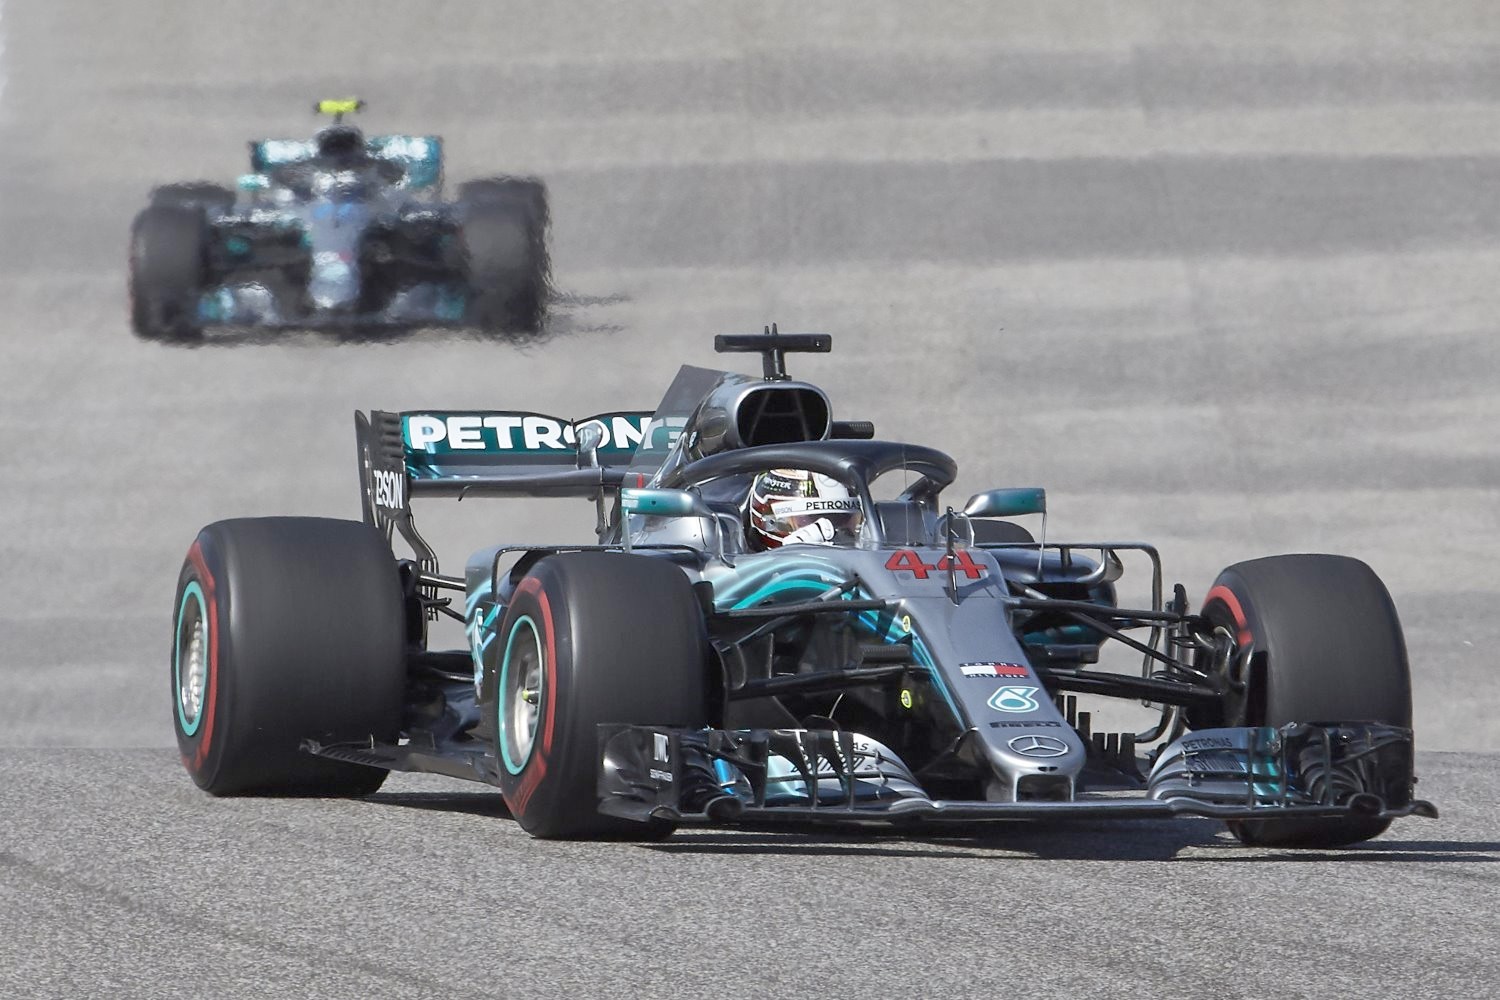 F1 wanted wide tires. Now they have them. Makes passing harder as they create more turbulance